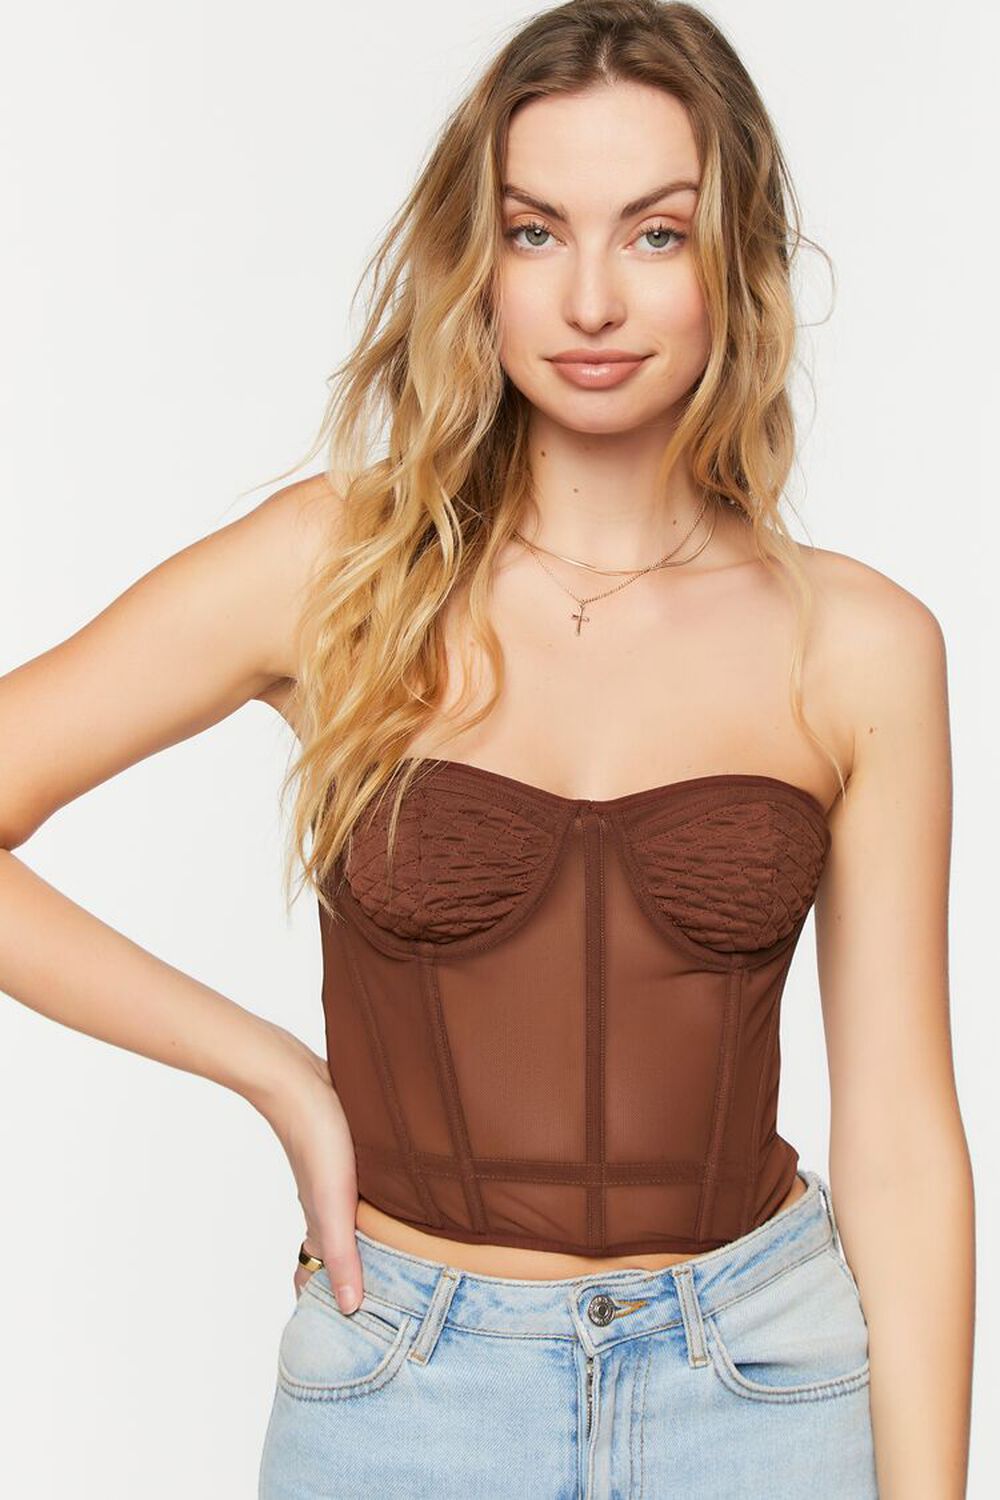 TURKISH COFFEE Mesh Quilted Bustier Tube Top, image 1